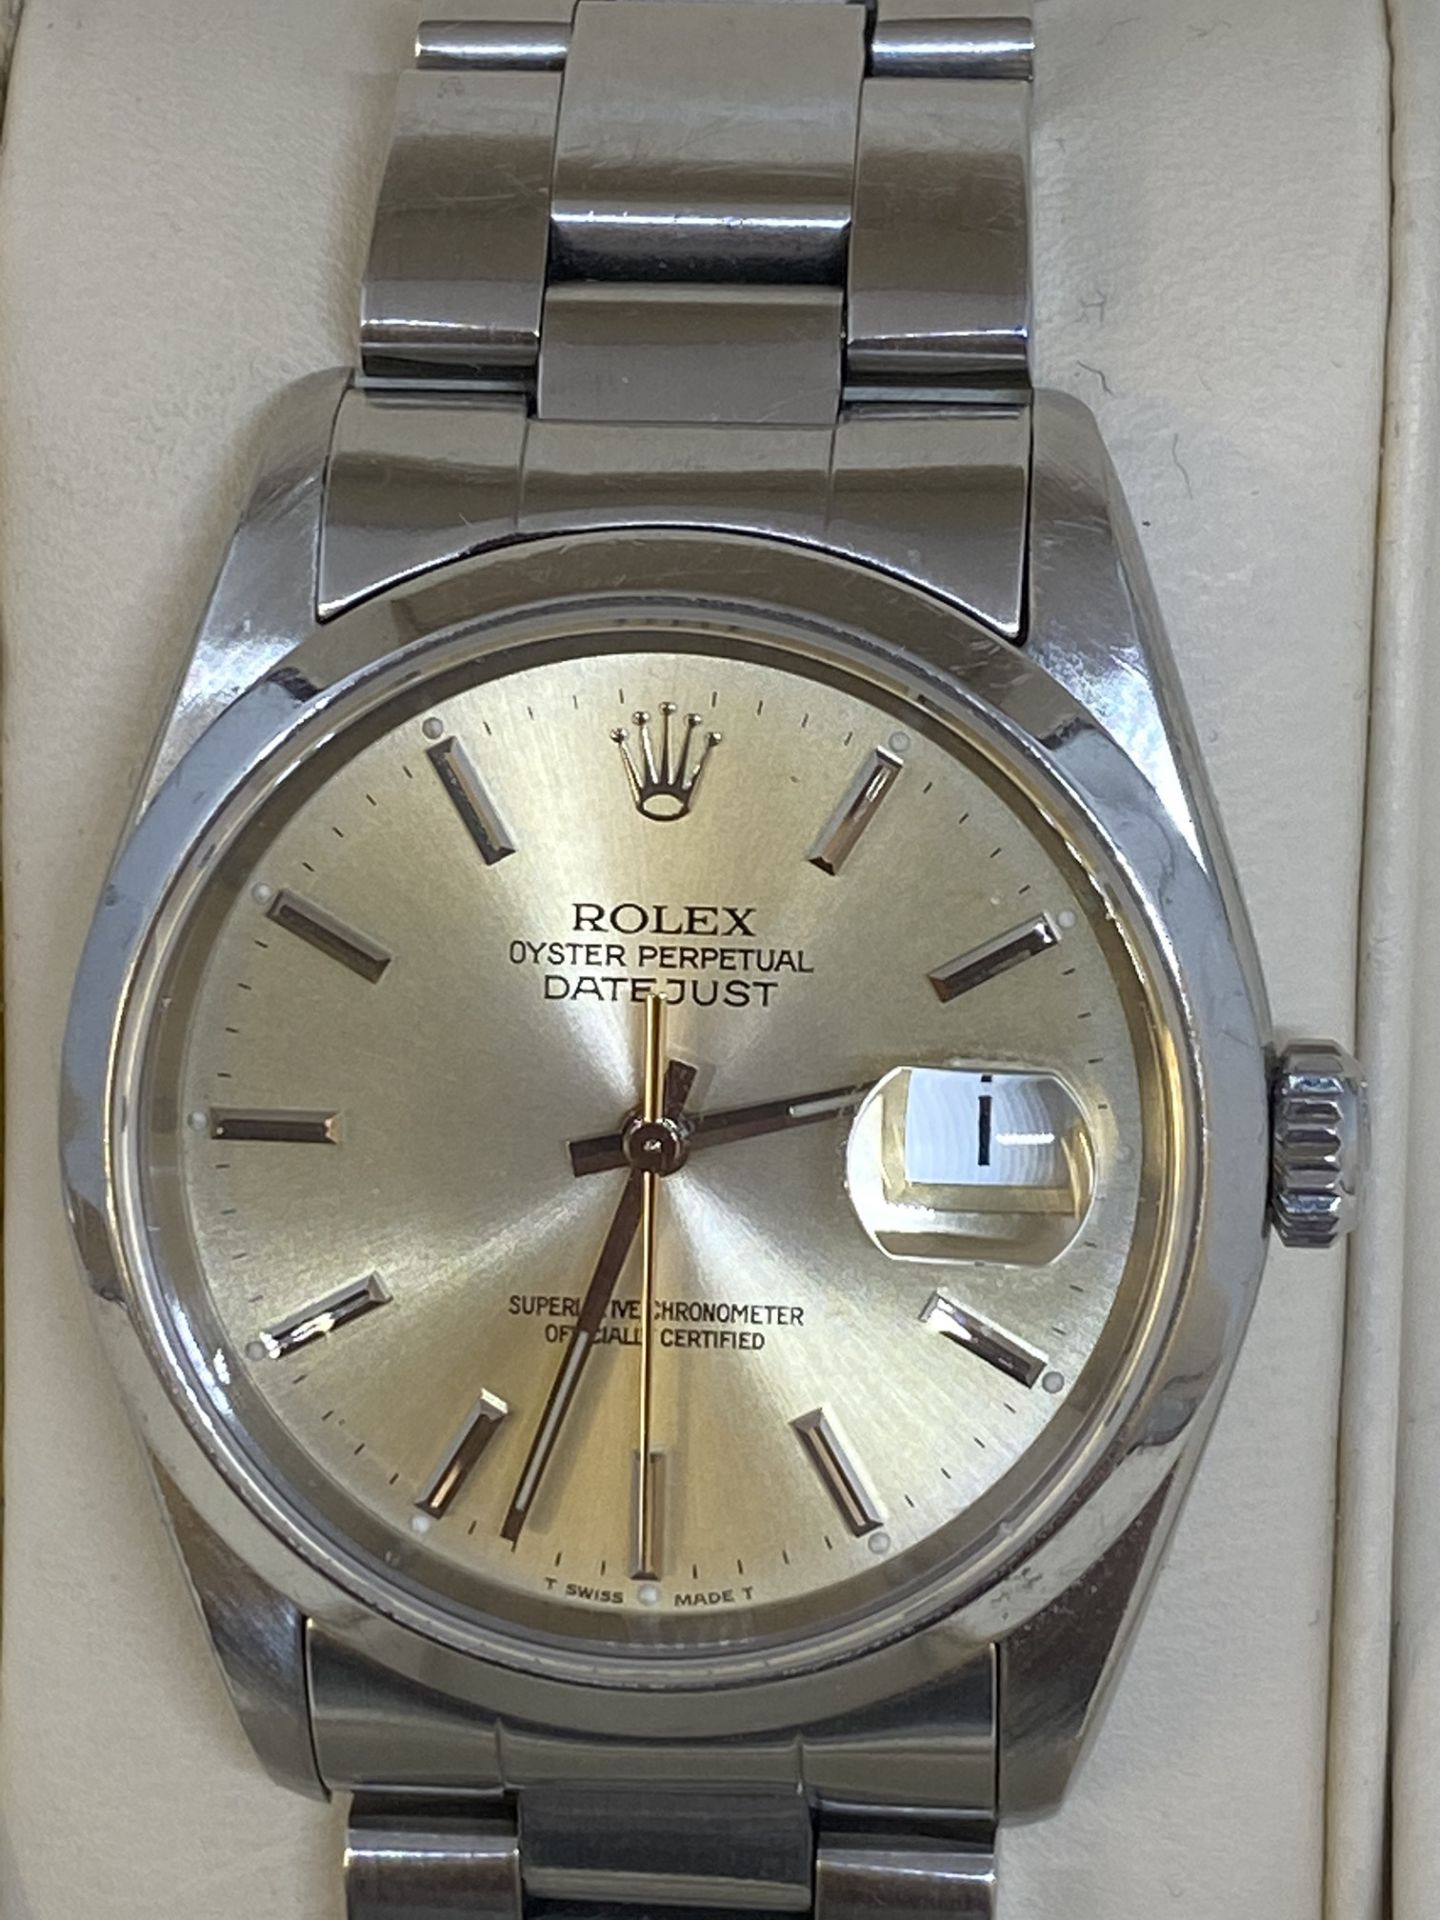 ROLEX STAINLESS STEEL WATCH - Image 2 of 8